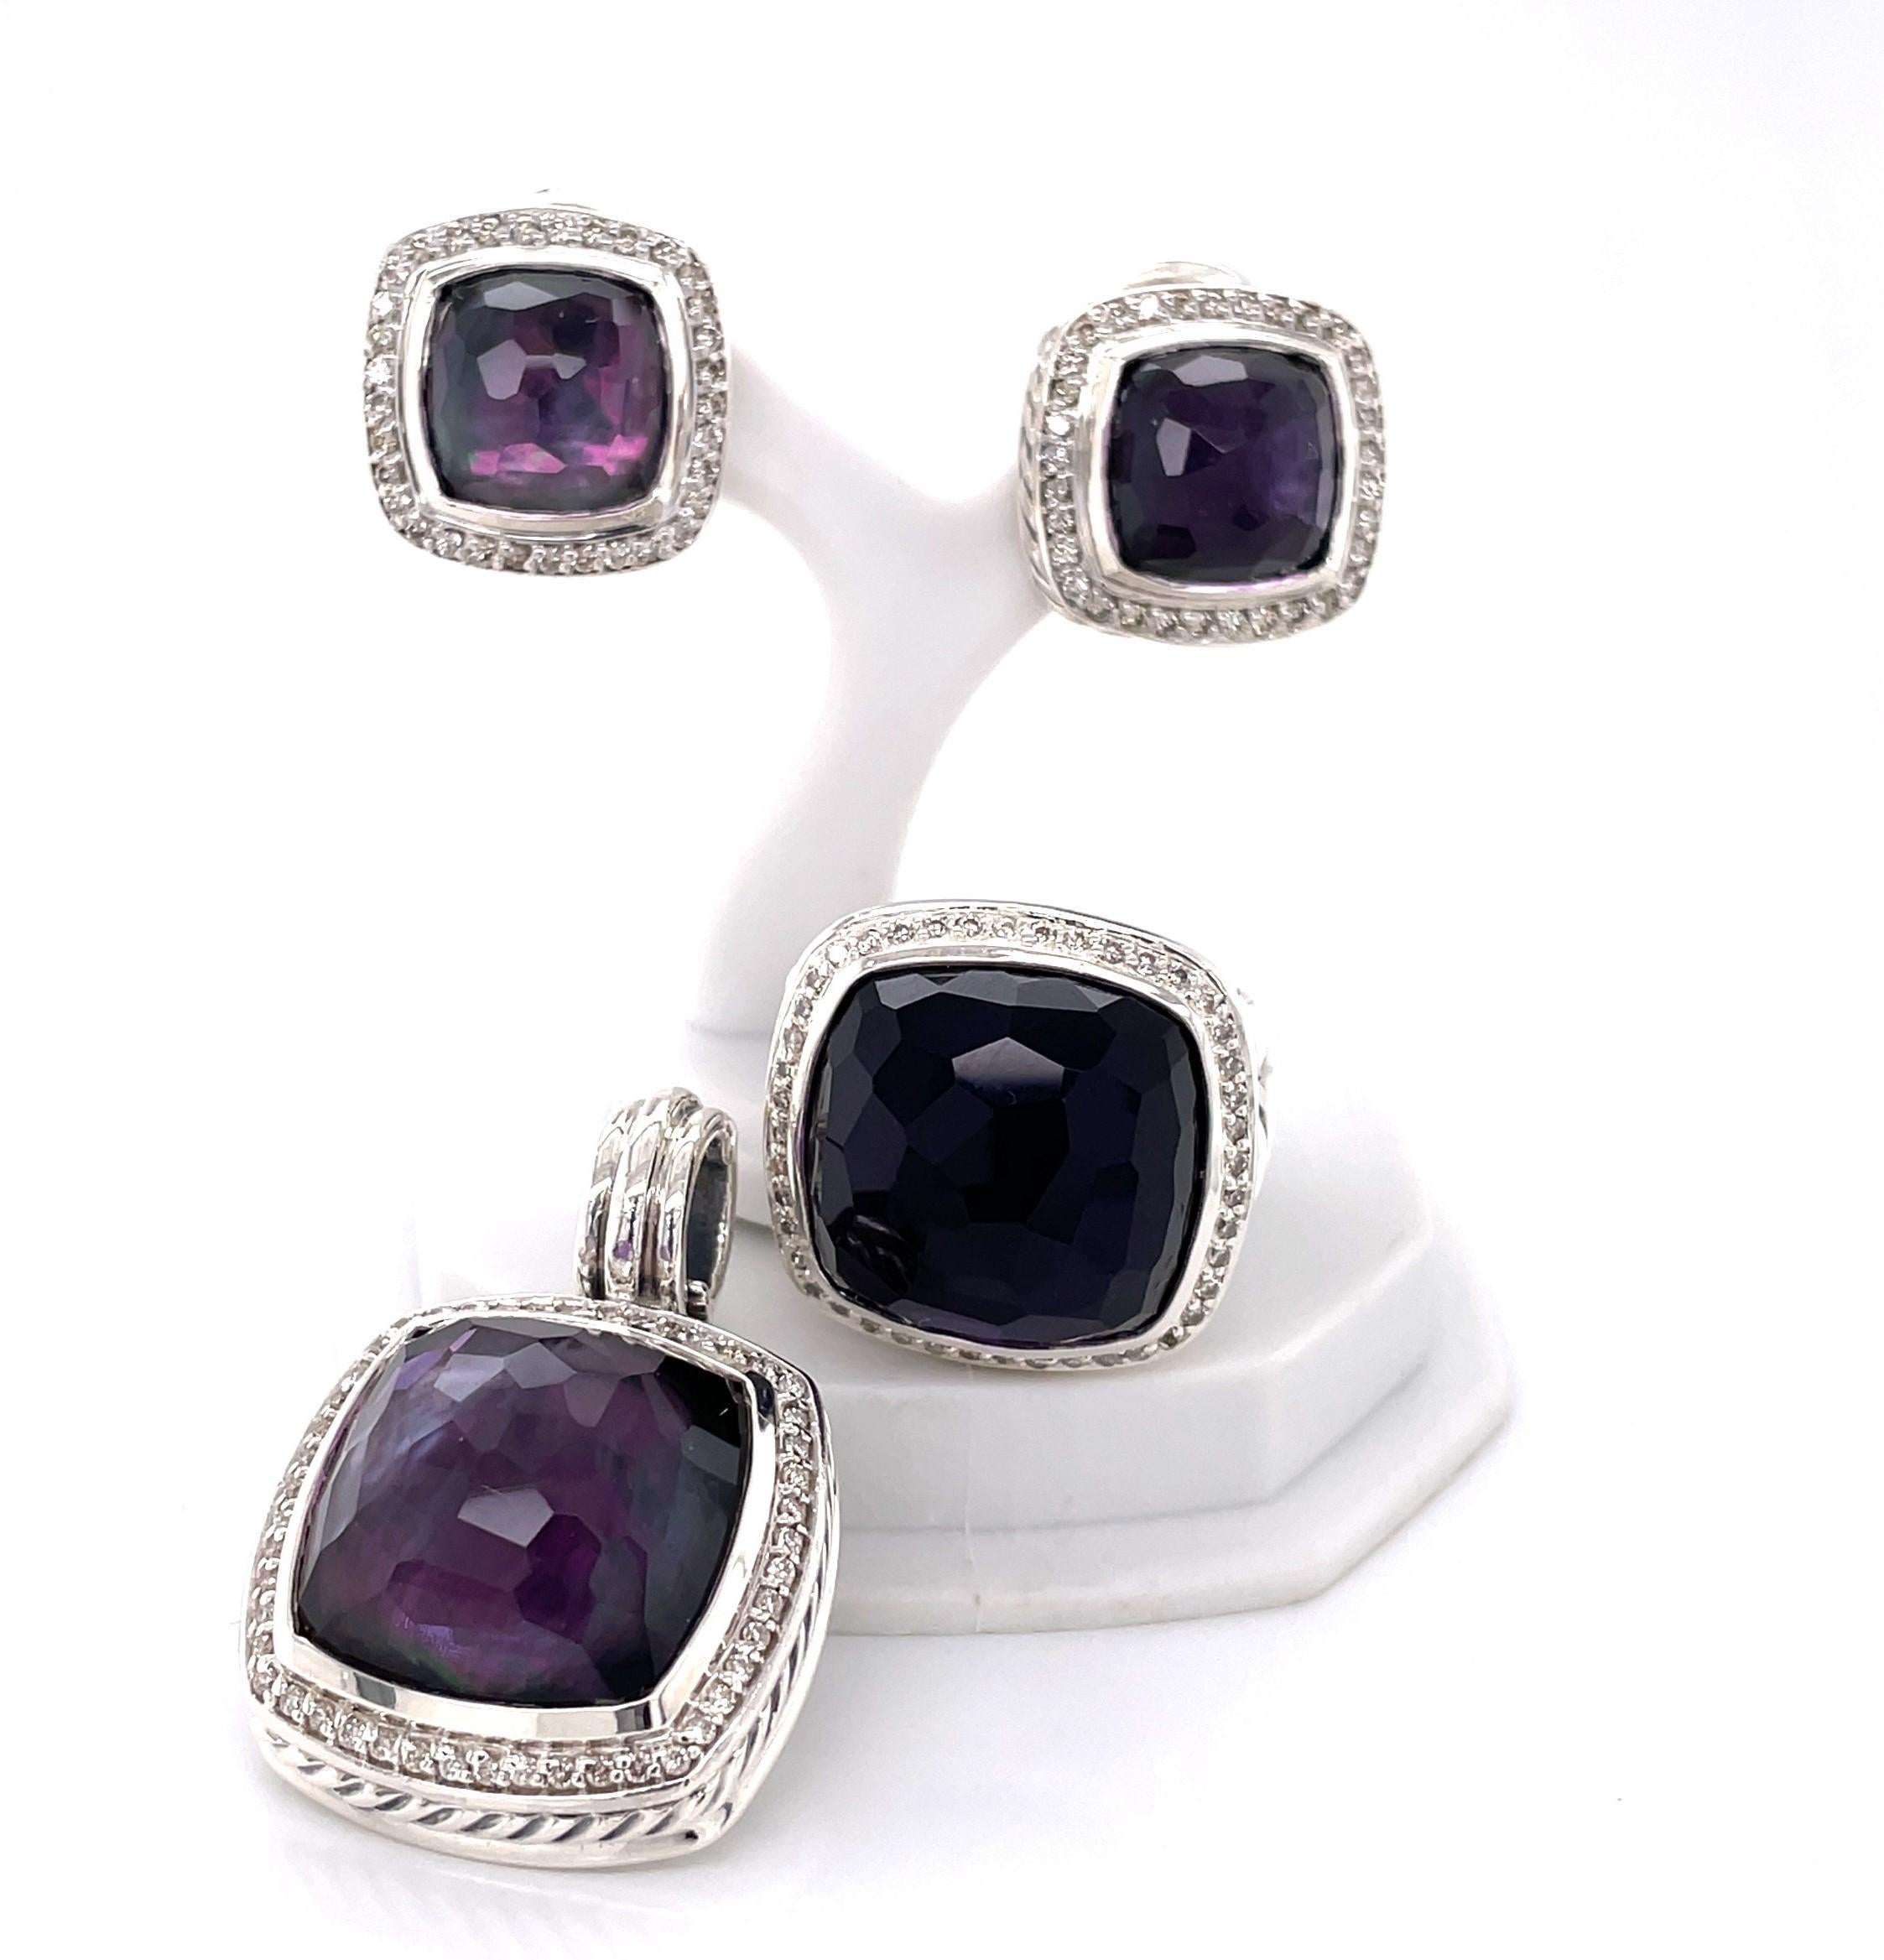 By well known designer David Yurman, enjoy this suite from the Albion Collection in Black Orchid. Albion's signature is a faceted, cushion shape designed to be worn day or evening, as casual accessories to elevate your look. This popular suite